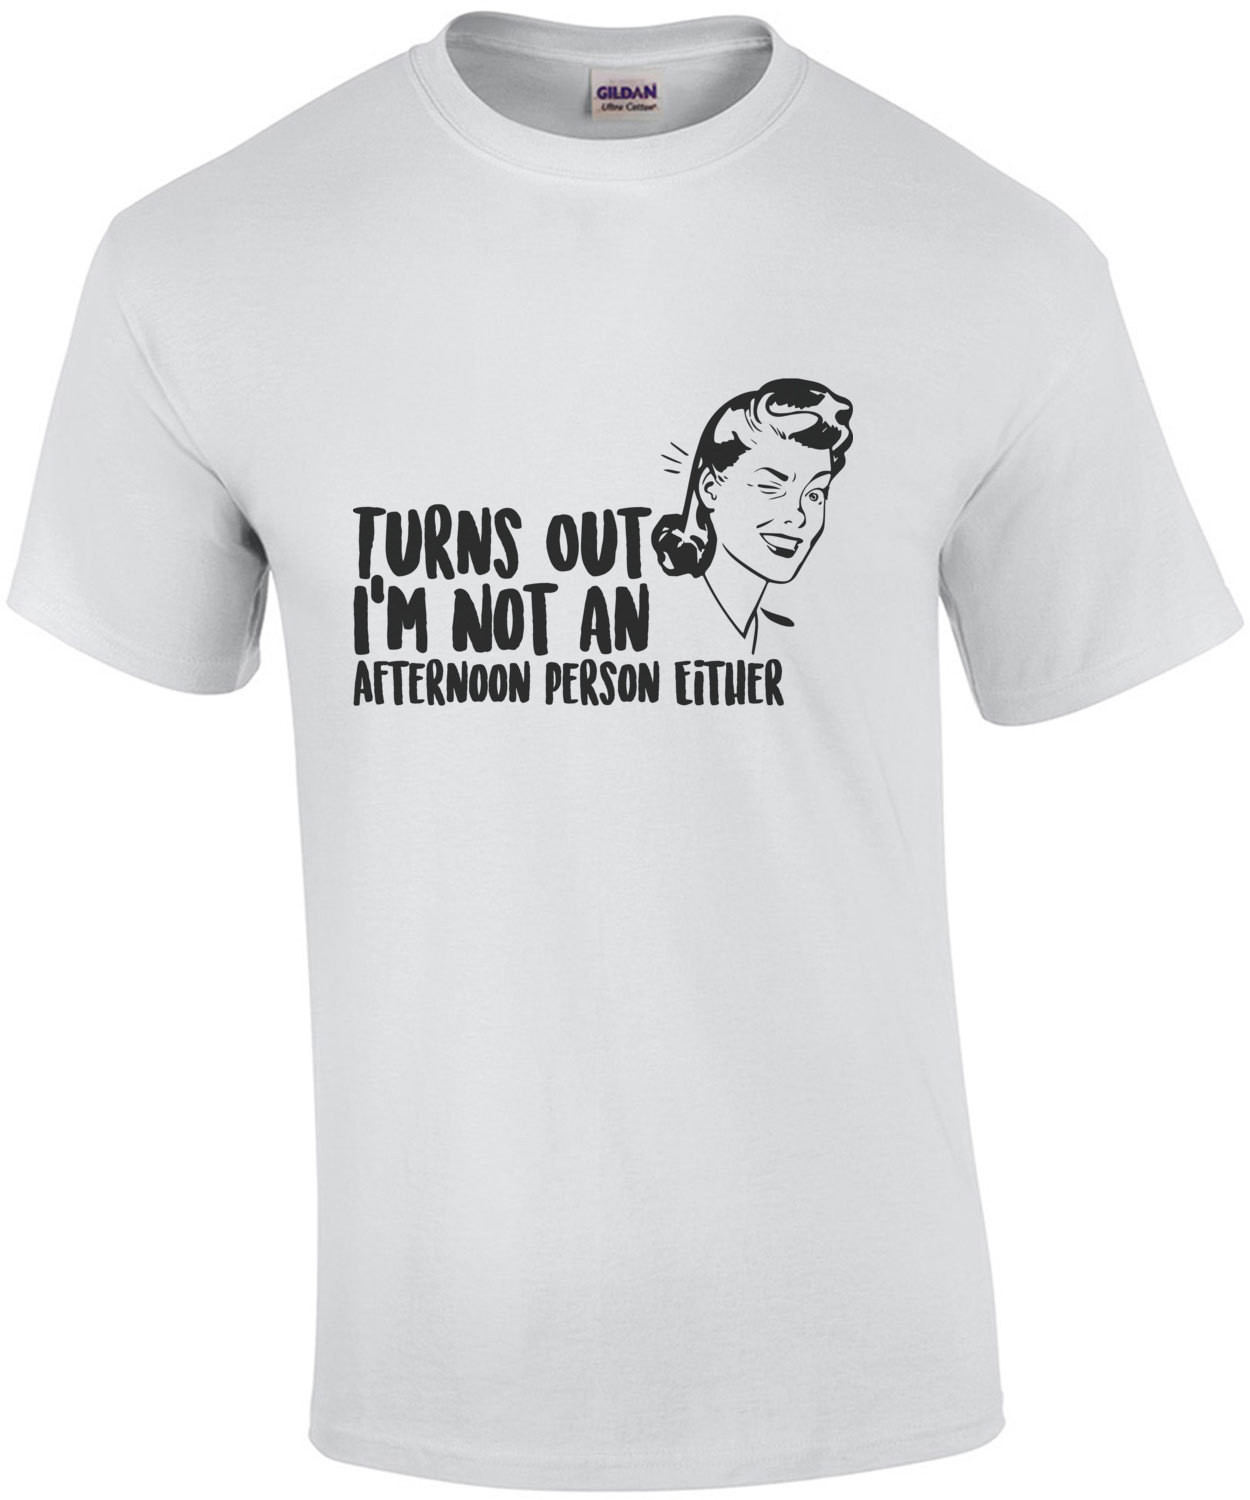 Turns out I'm not an afternoon person either - funny sarcastic t-shirt